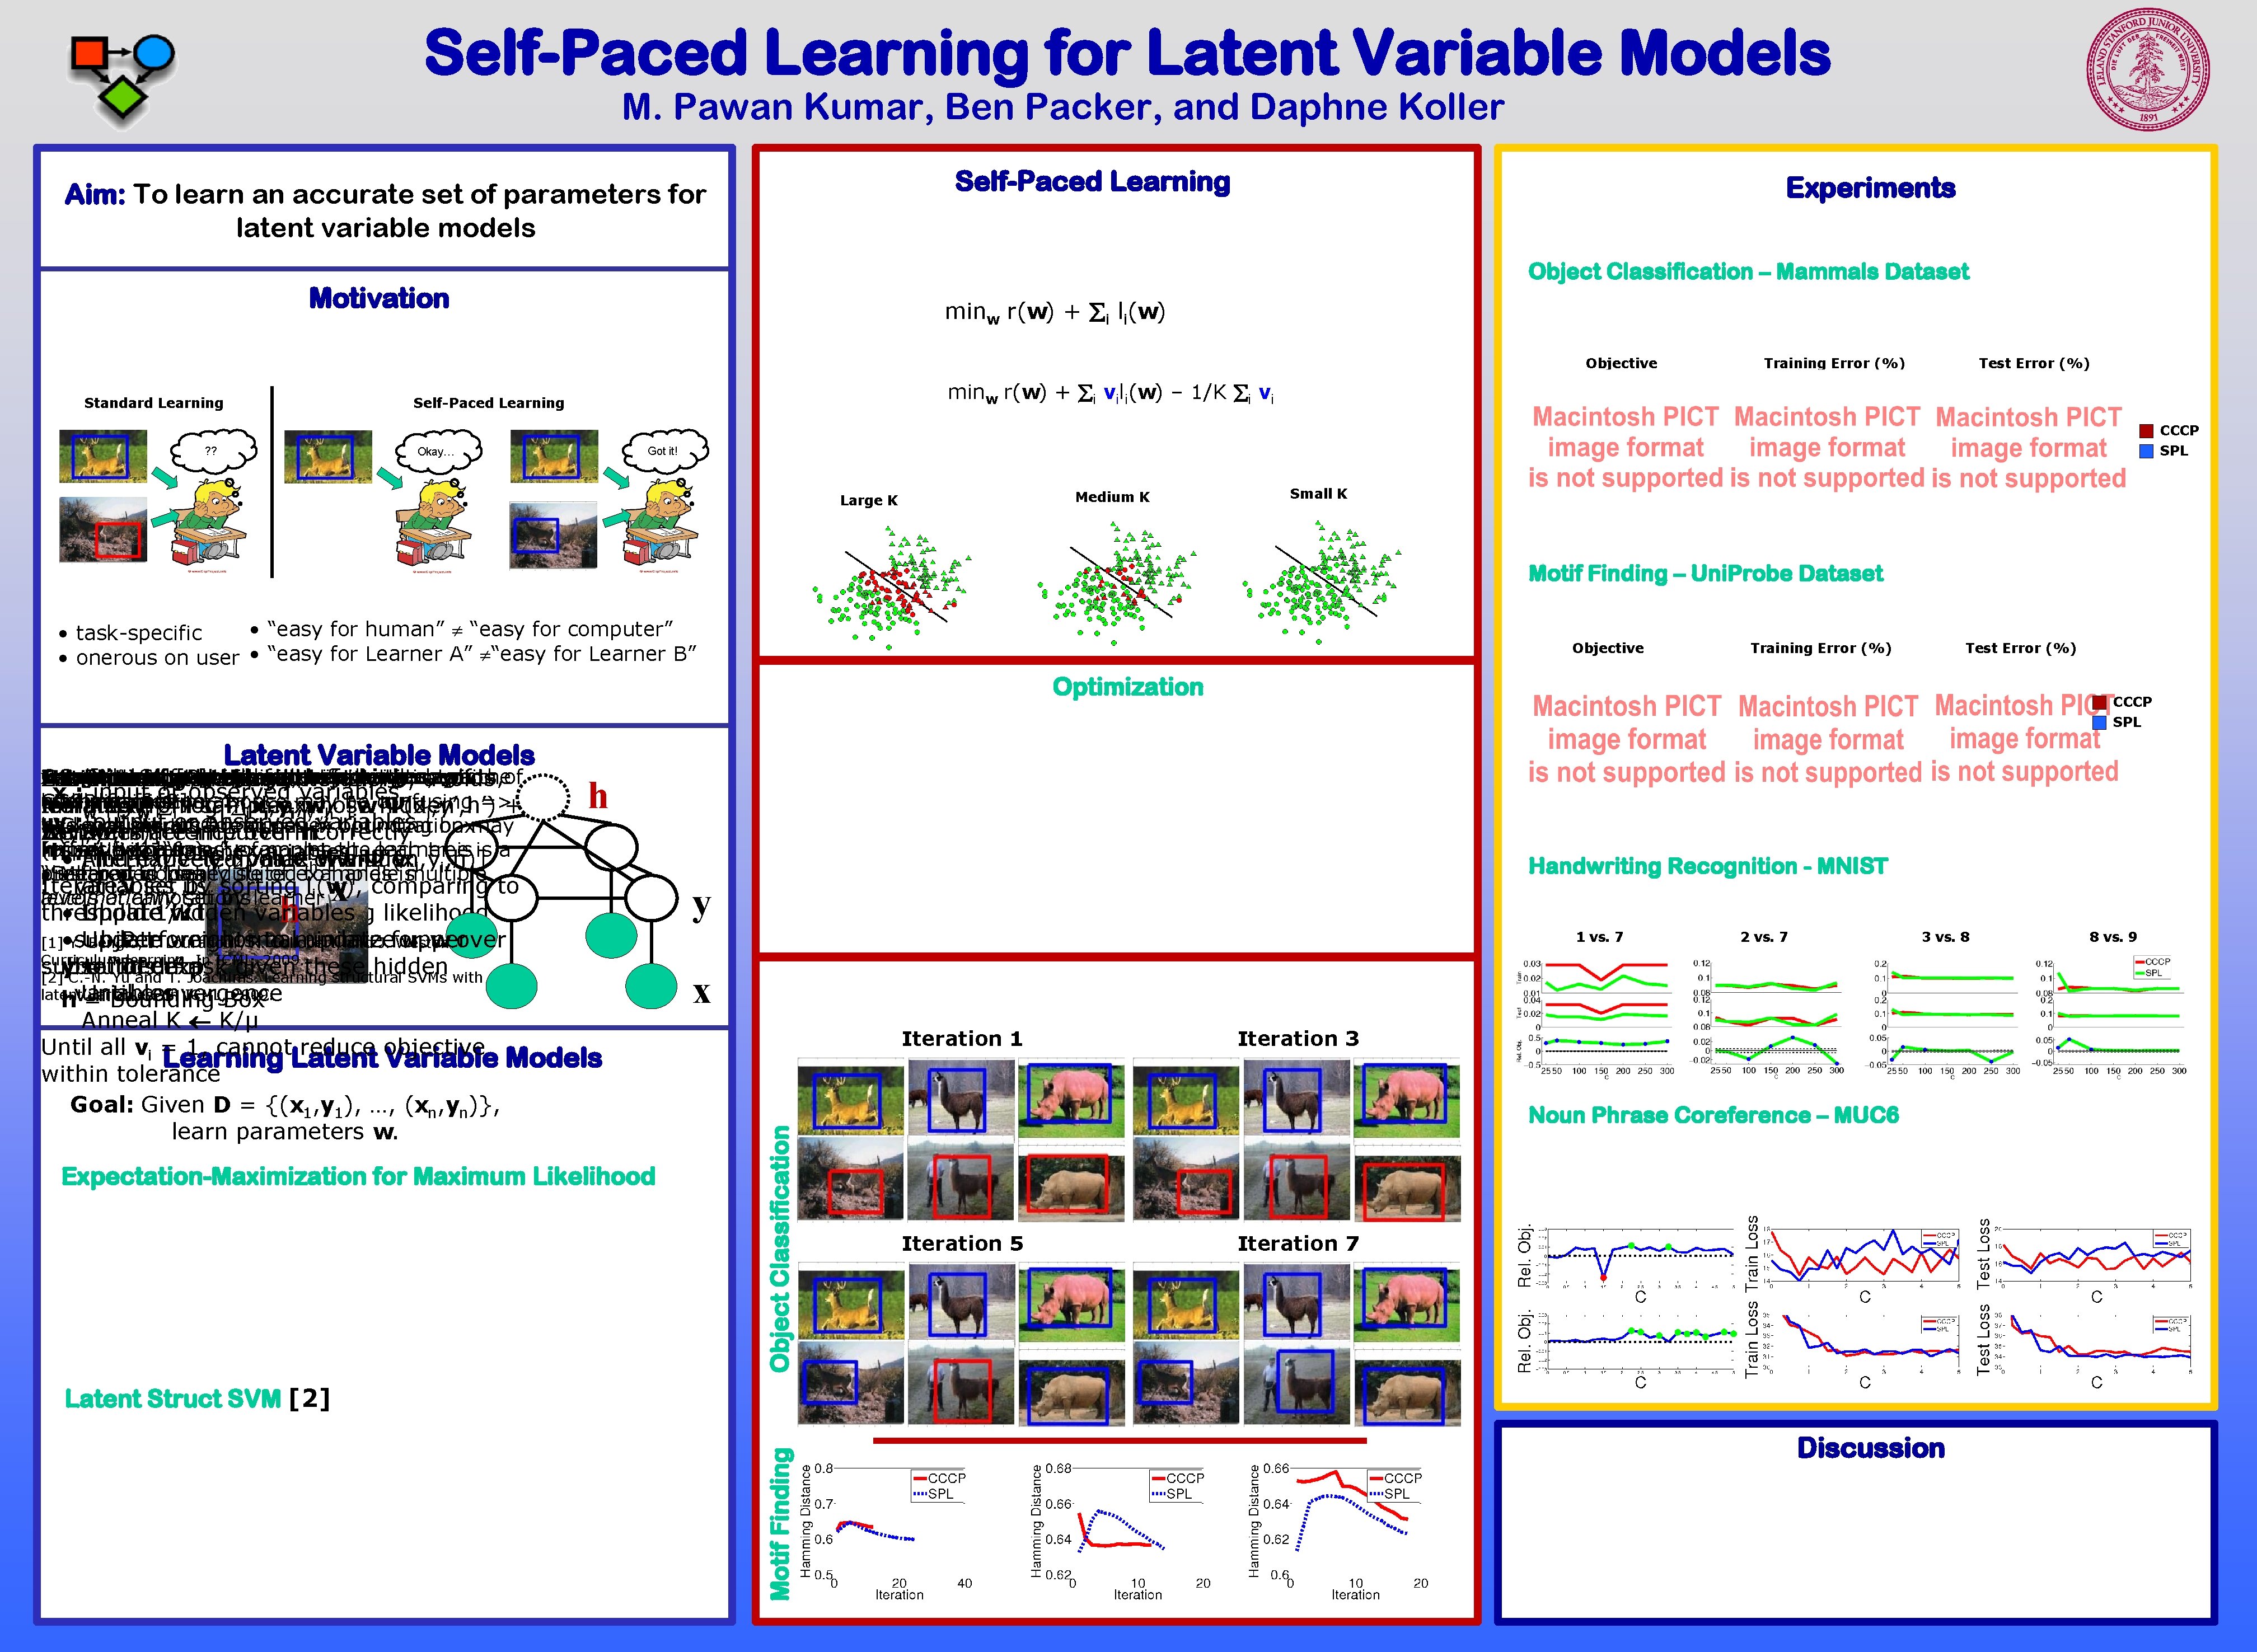 Self-Paced Learning for Latent Variable Models M. Pawan Kumar, Ben Packer, and Daphne Koller